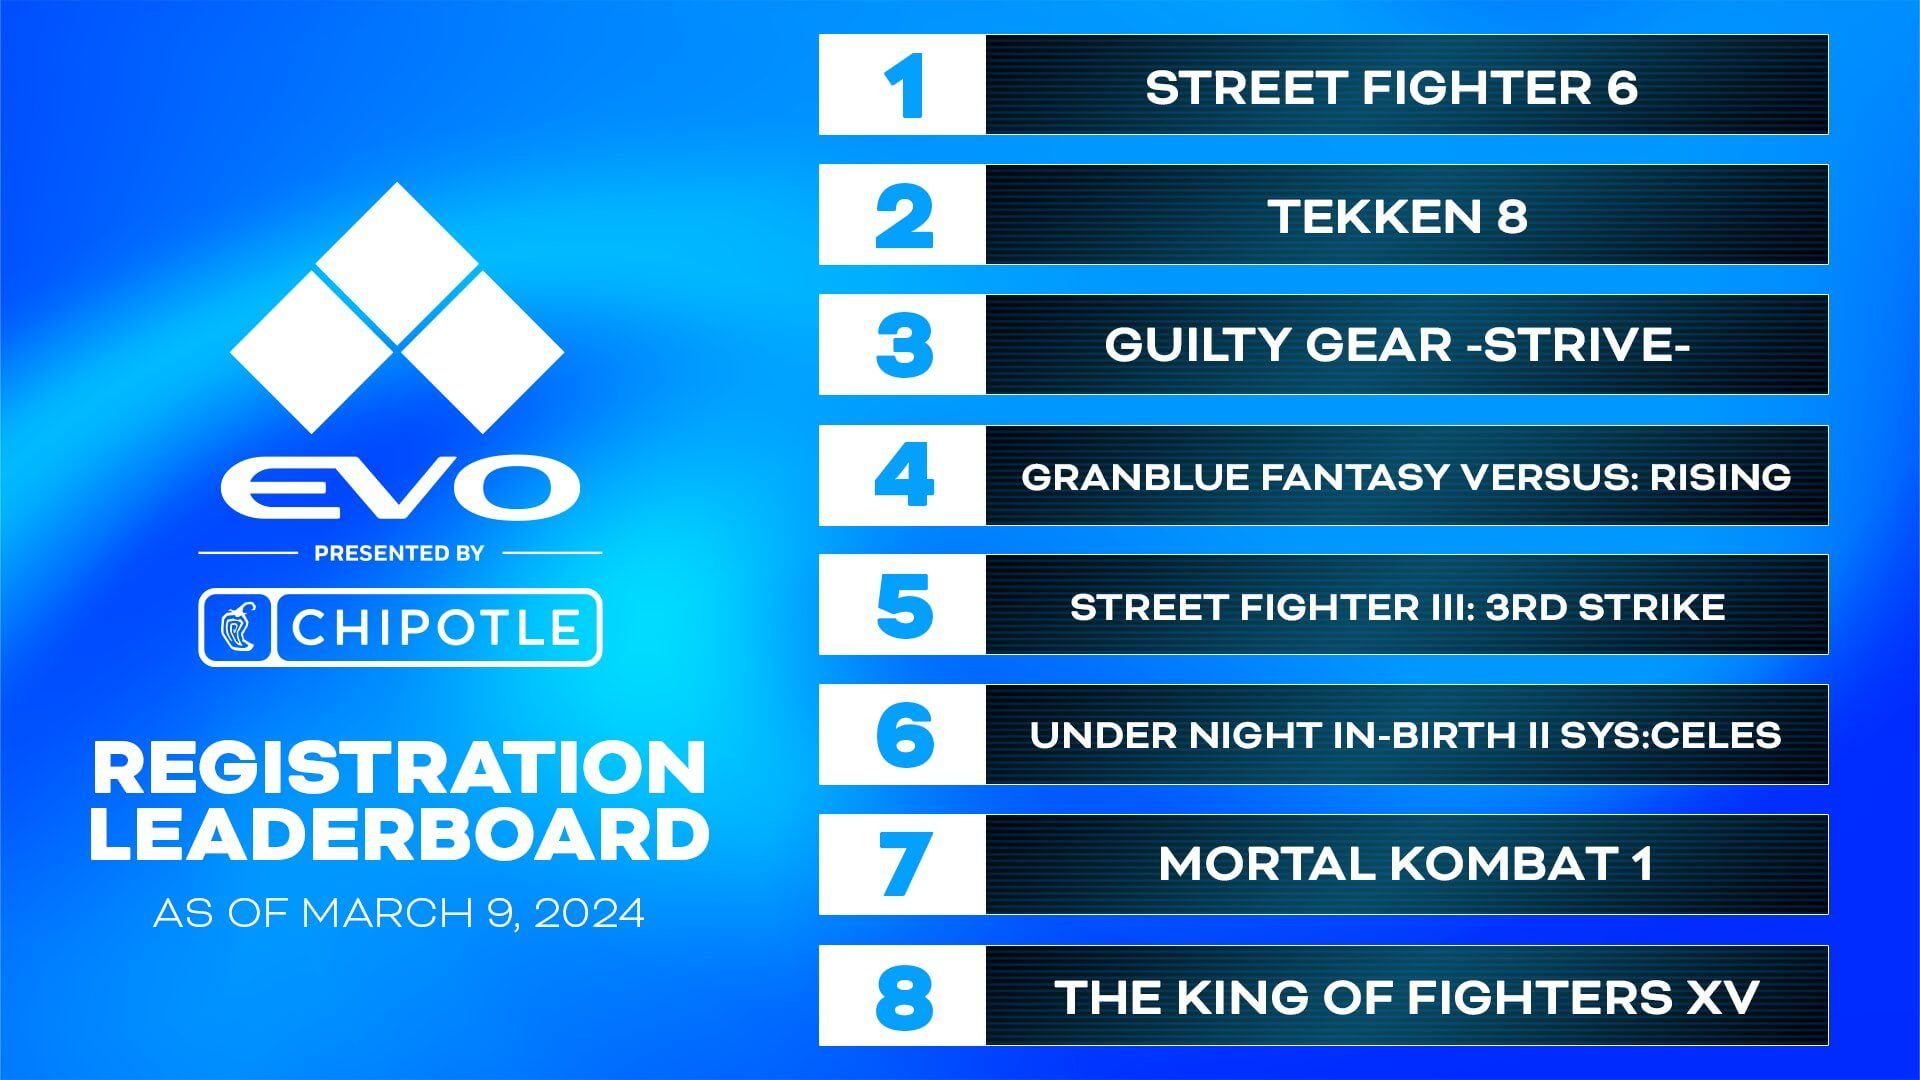 Street Fighter 6 is Leading the Evo 2024 Early Bird Registrations